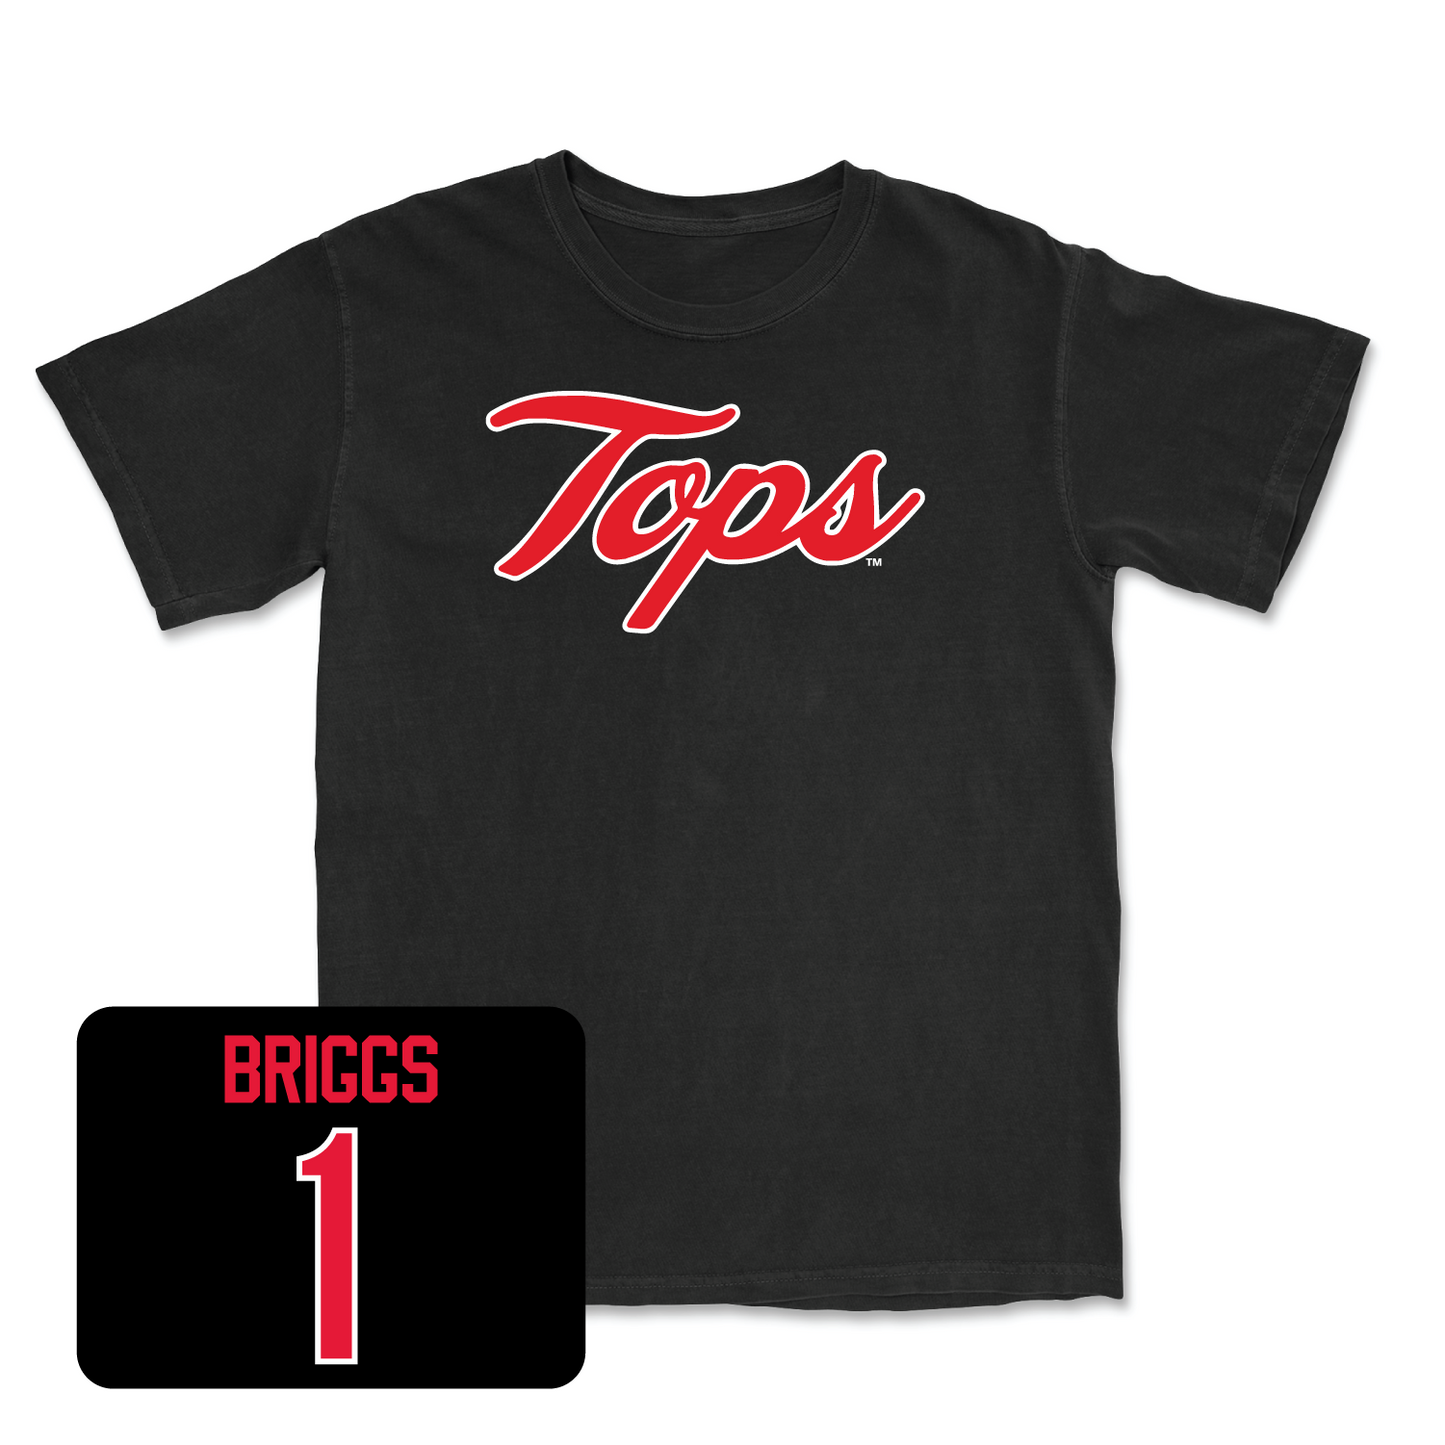 Black Women's Volleyball Tops Tee 4X-Large / Paige Briggs | #1